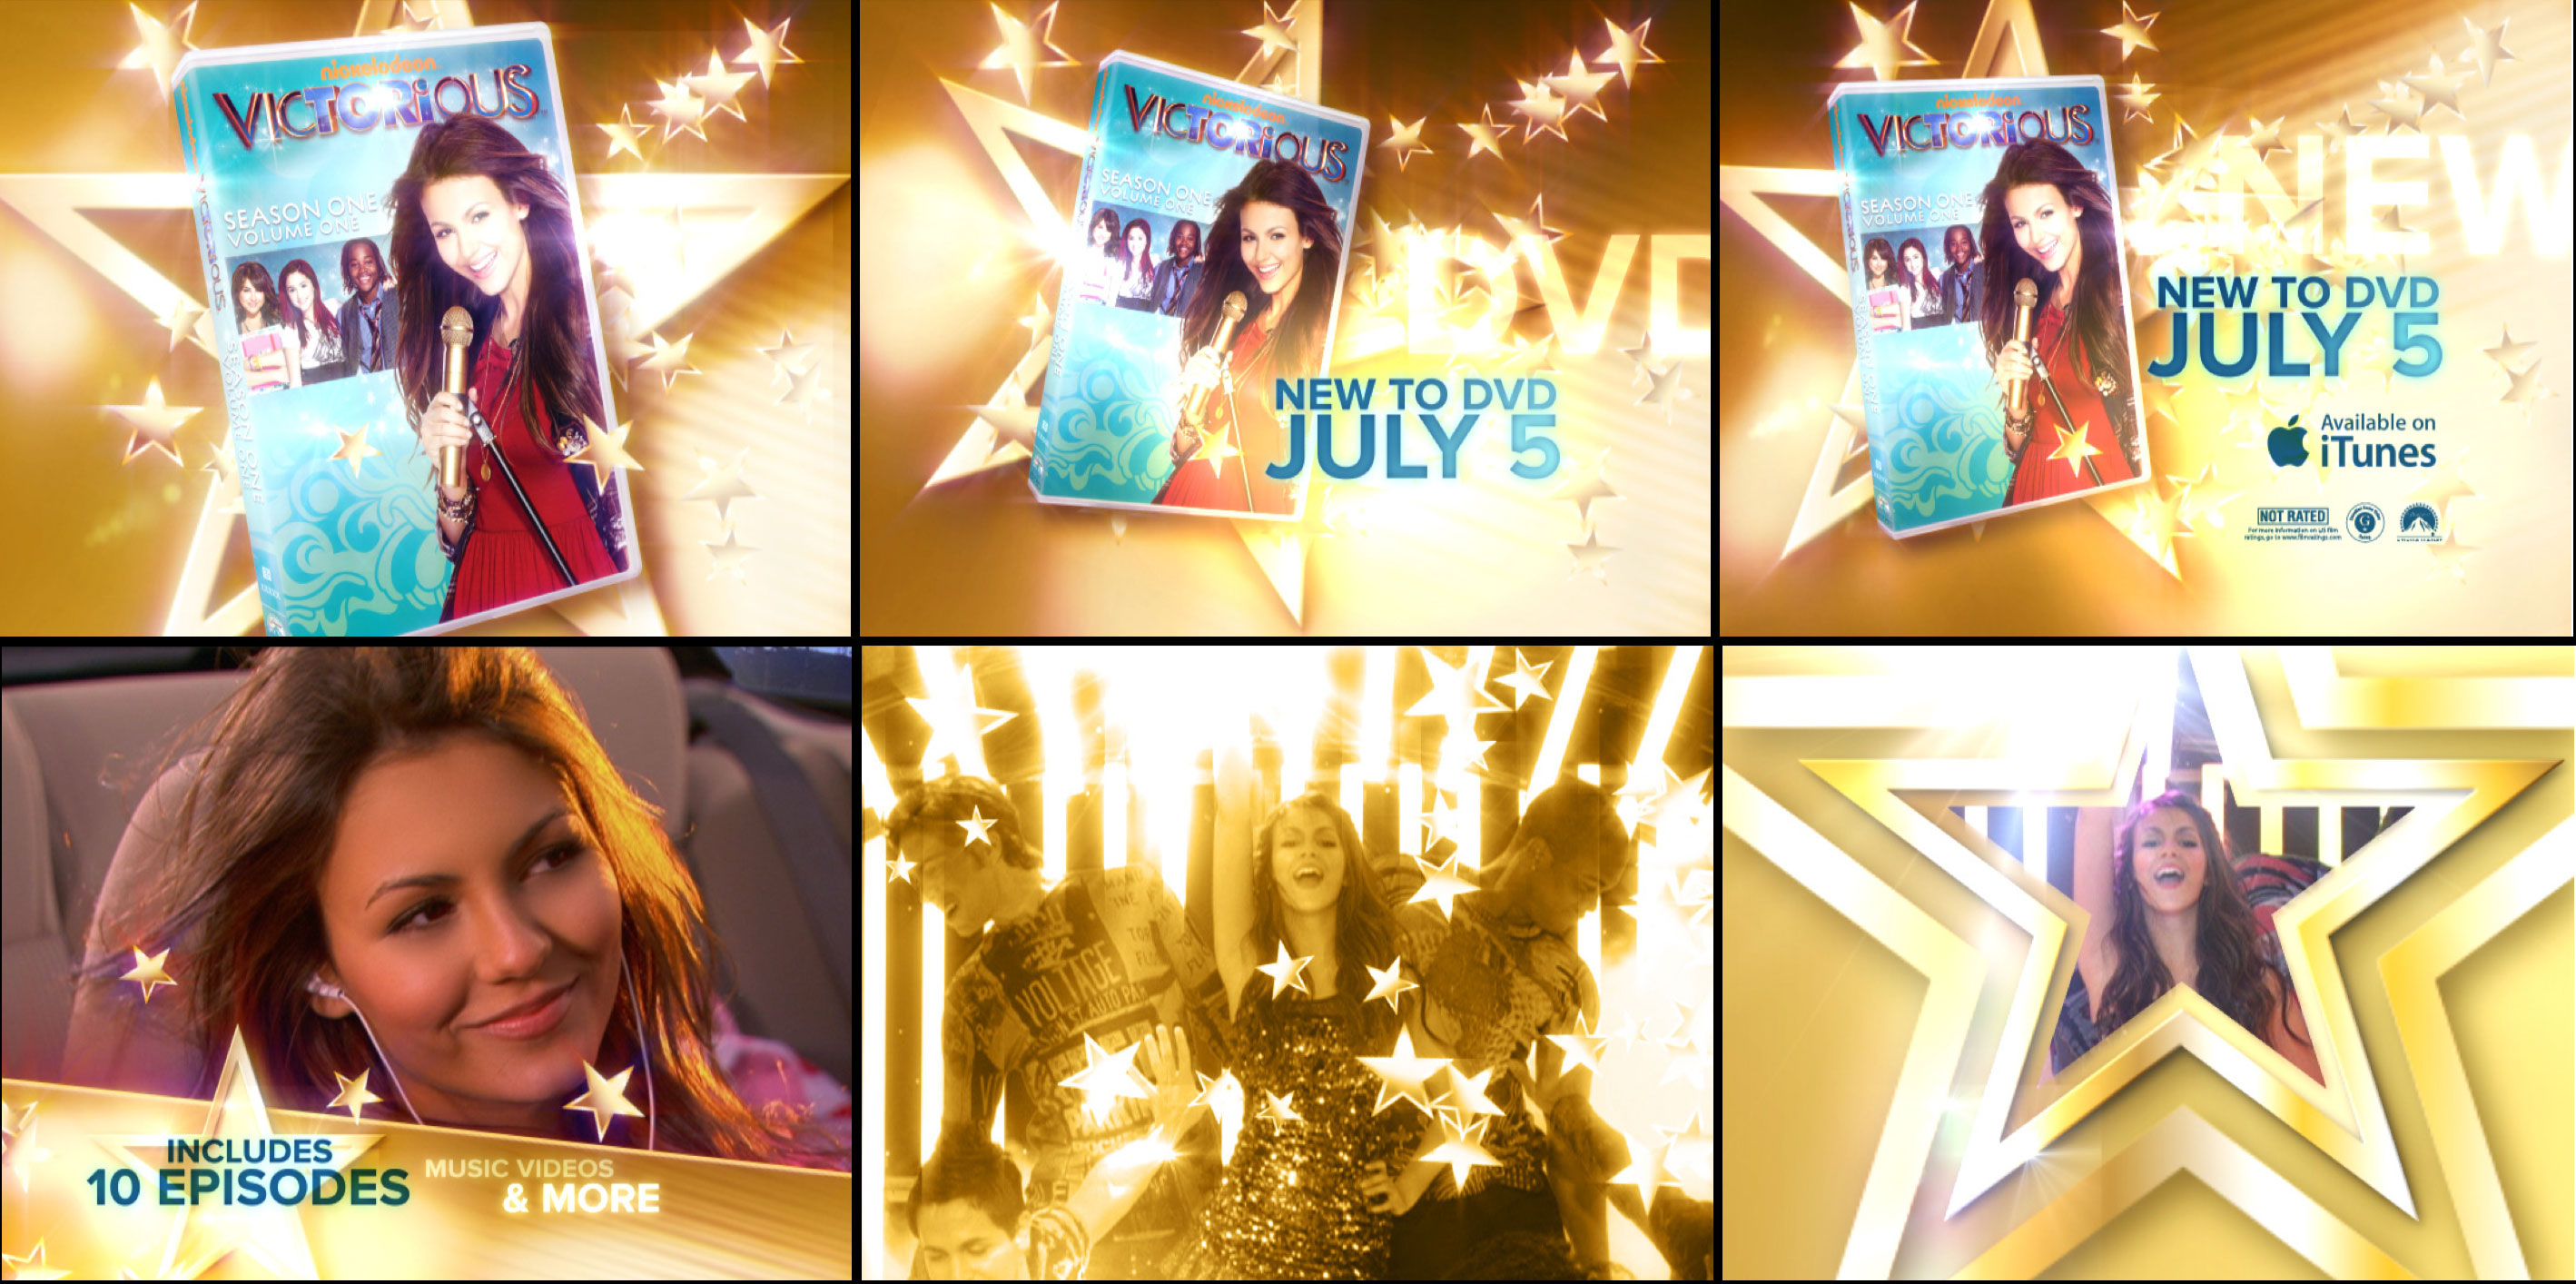 Victorious_DVD_stars